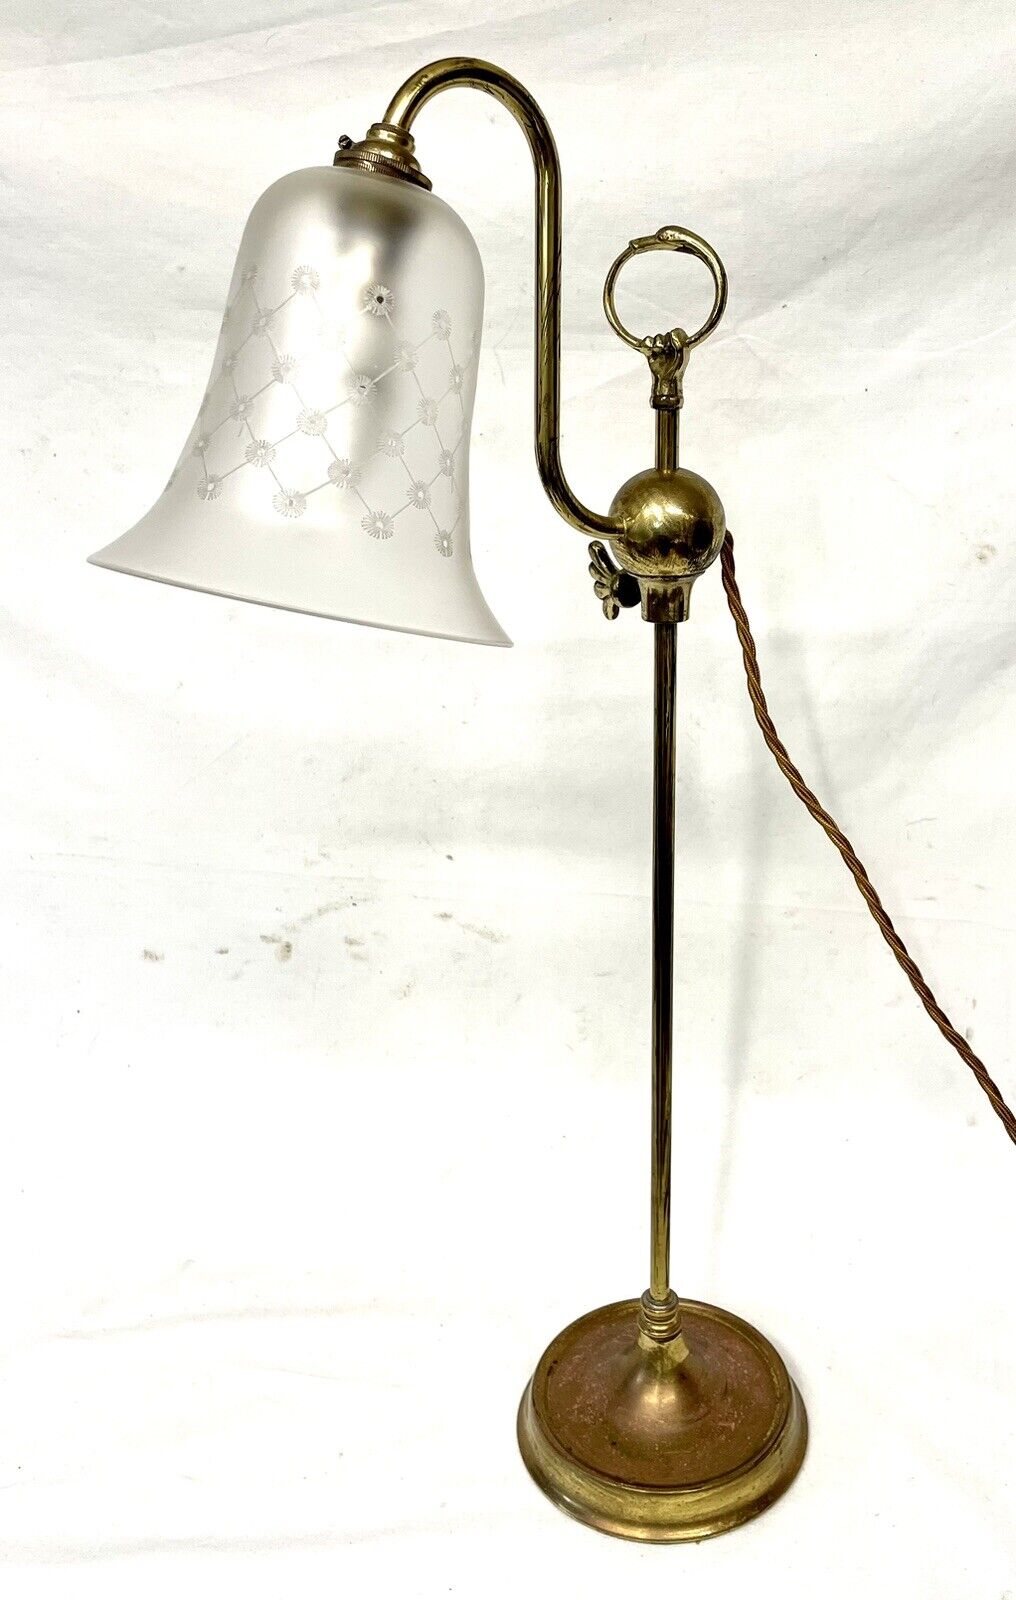 Original Antique EDWARDIAN Brass Rise and Fall Adjustable Desk / Table Lamp